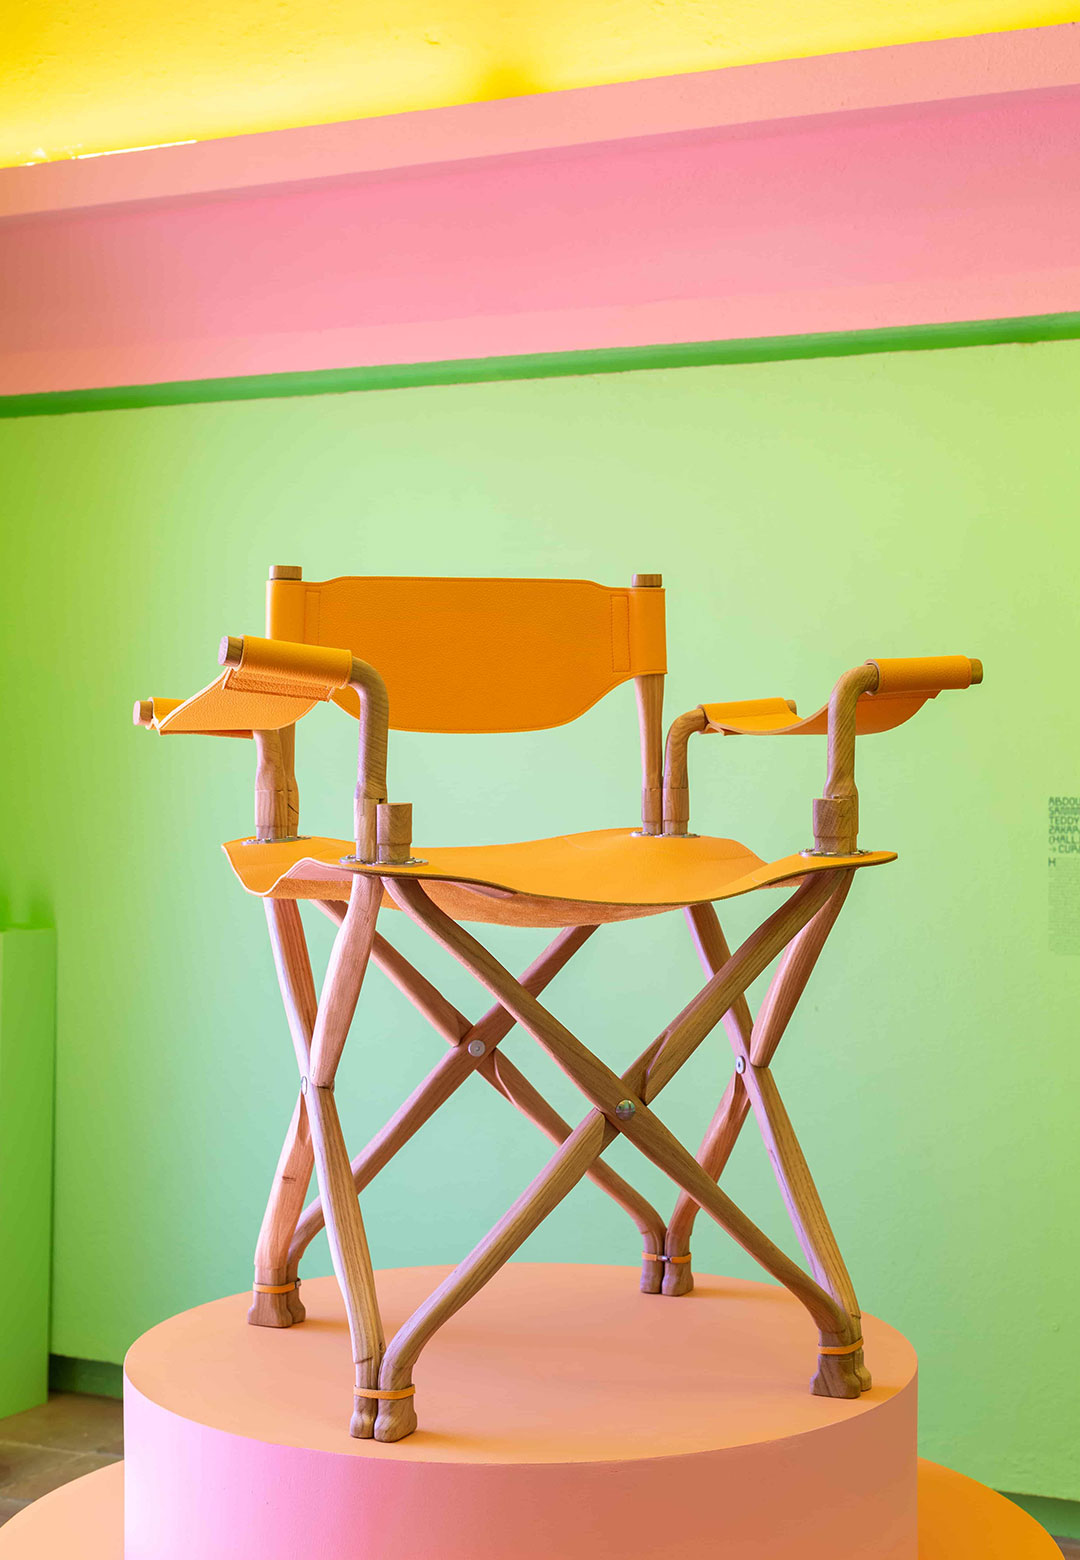 Design Parade brings animated homeware, silent garden tools and more to Hyères